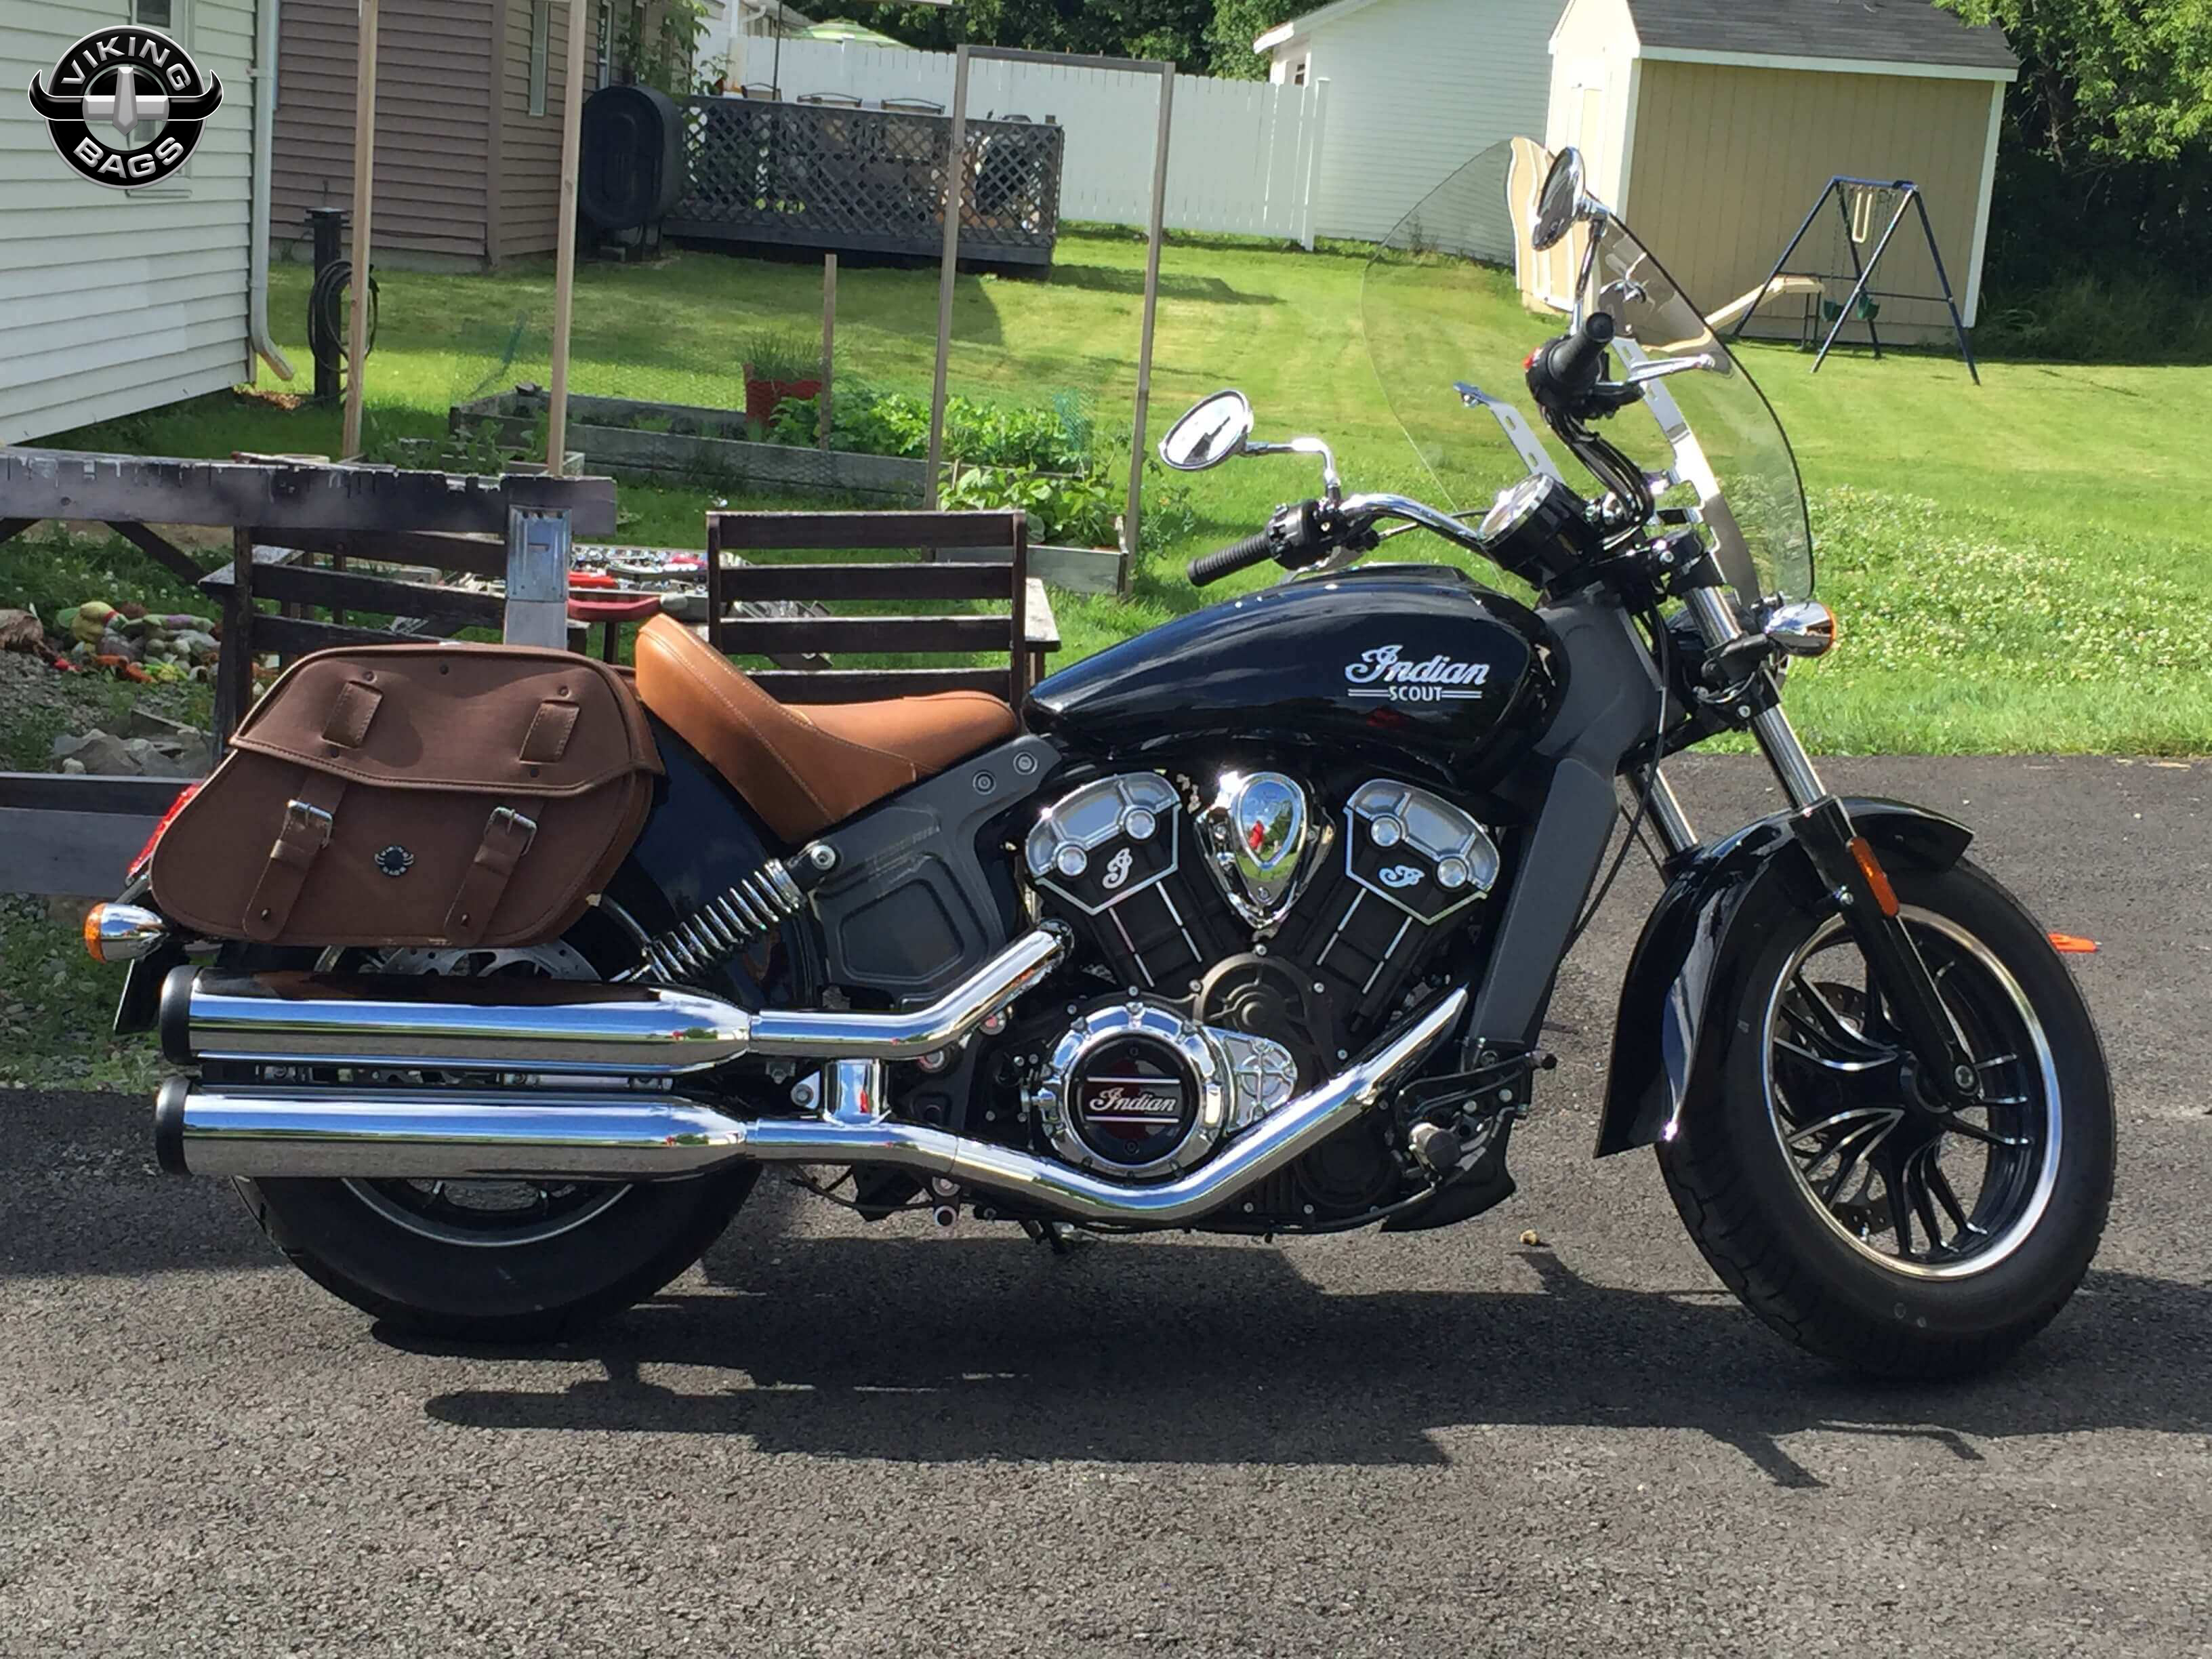 Indian Scout Saddlebags For Sale | Ermes